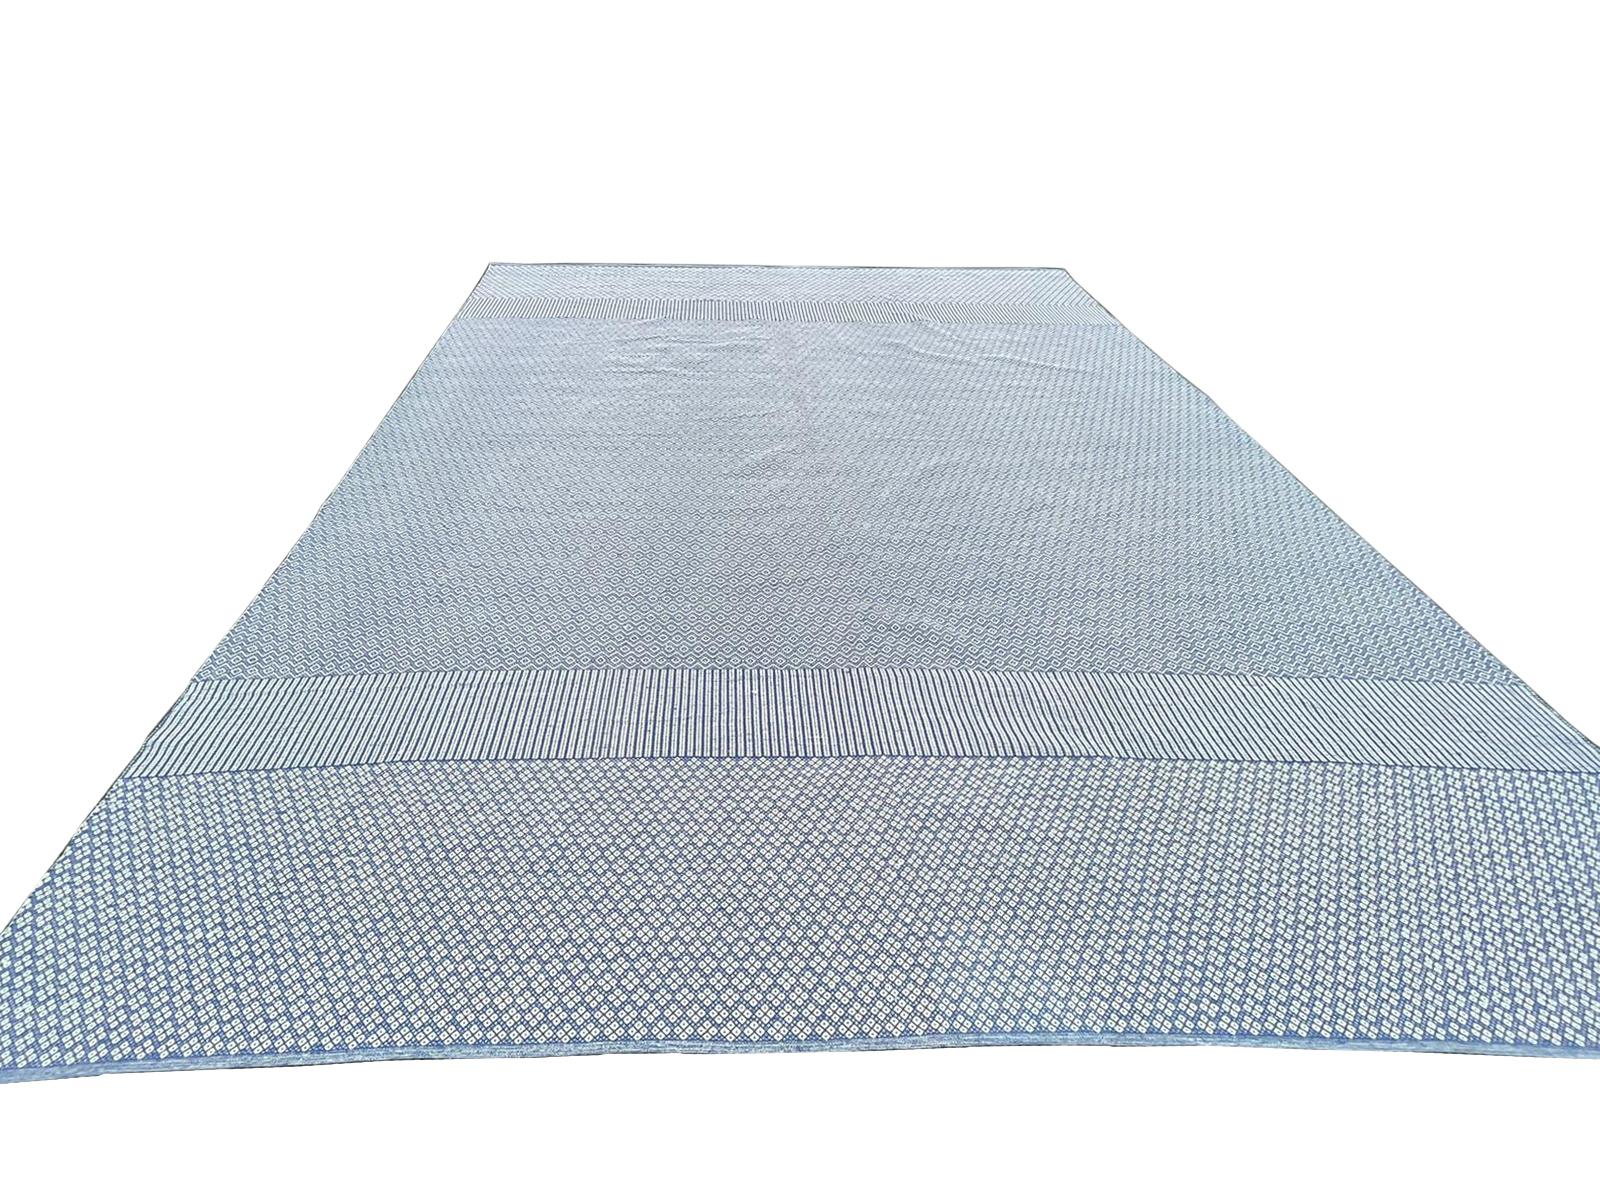 Contemporary Oversized Blue and White Flat-Weave Indian Kilim by Gordian Rugs